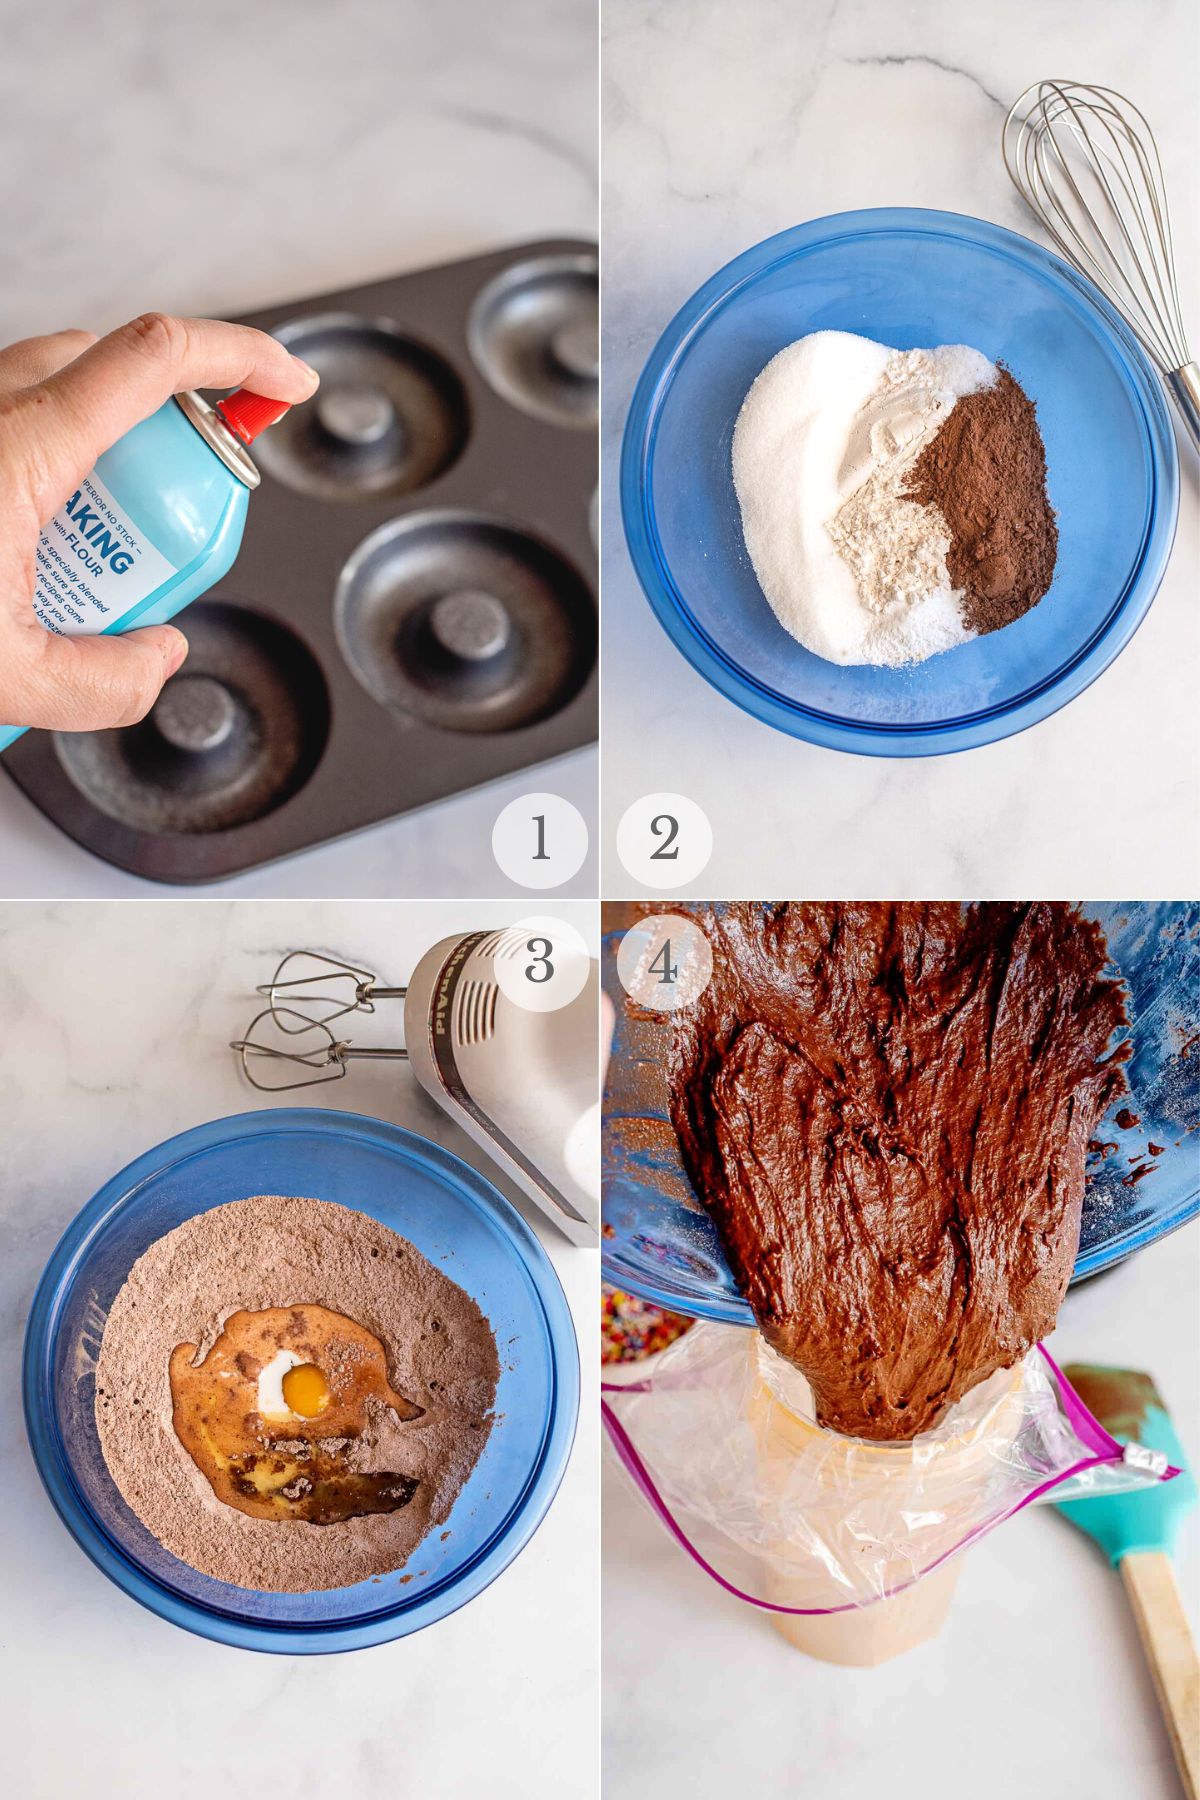 chocolate frosted donuts recipe steps 1-4.